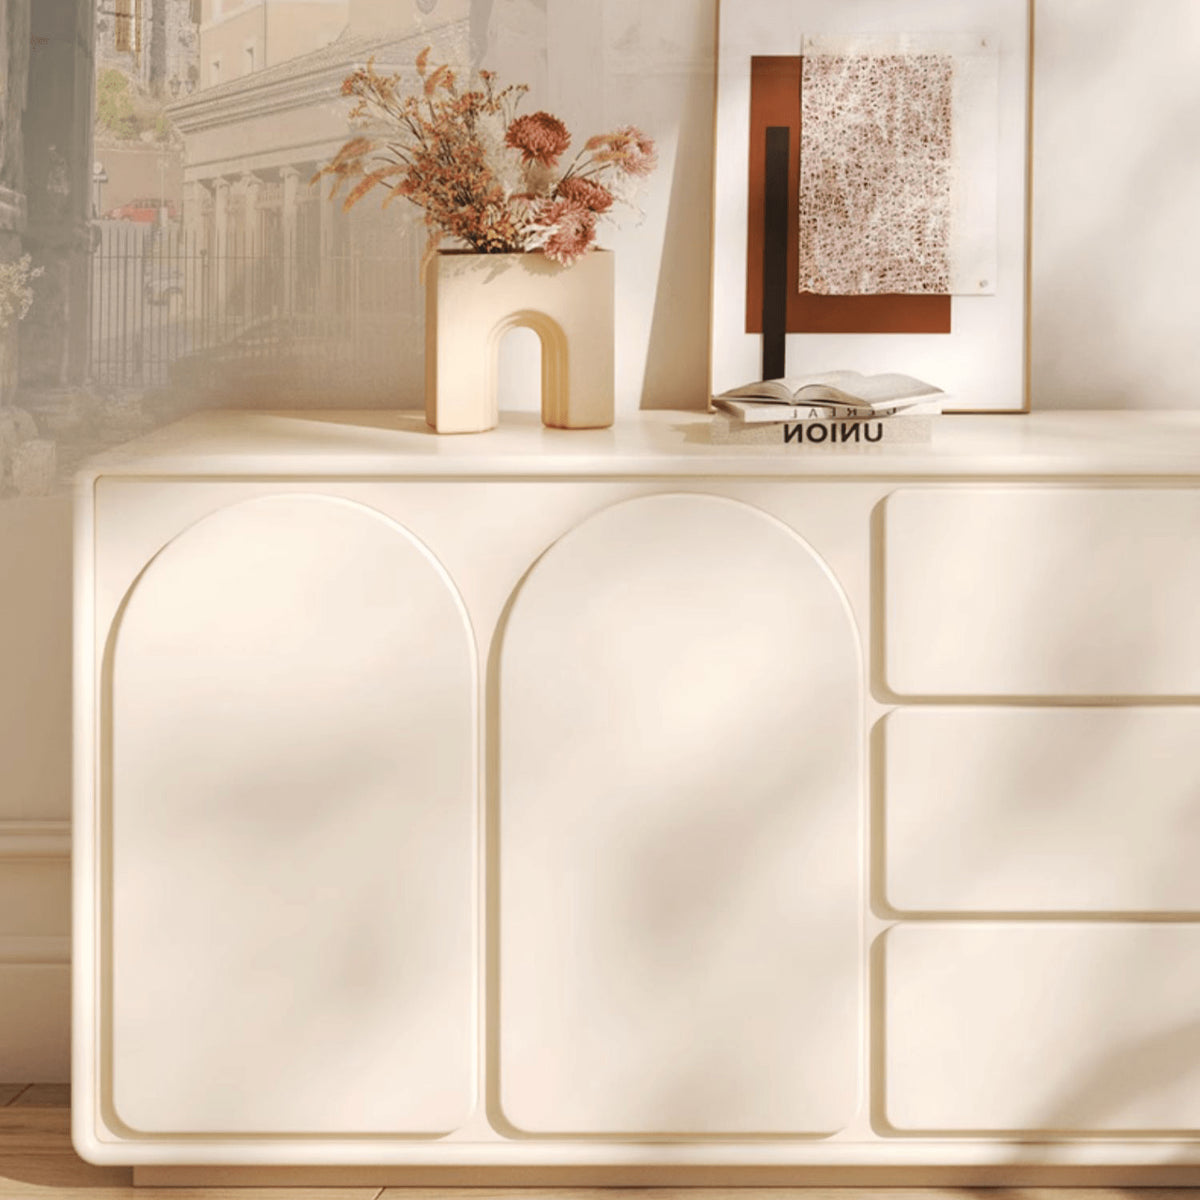 Chic Off White Makeup Table with Natural Wood Finish & Particle Board Construction yw-200